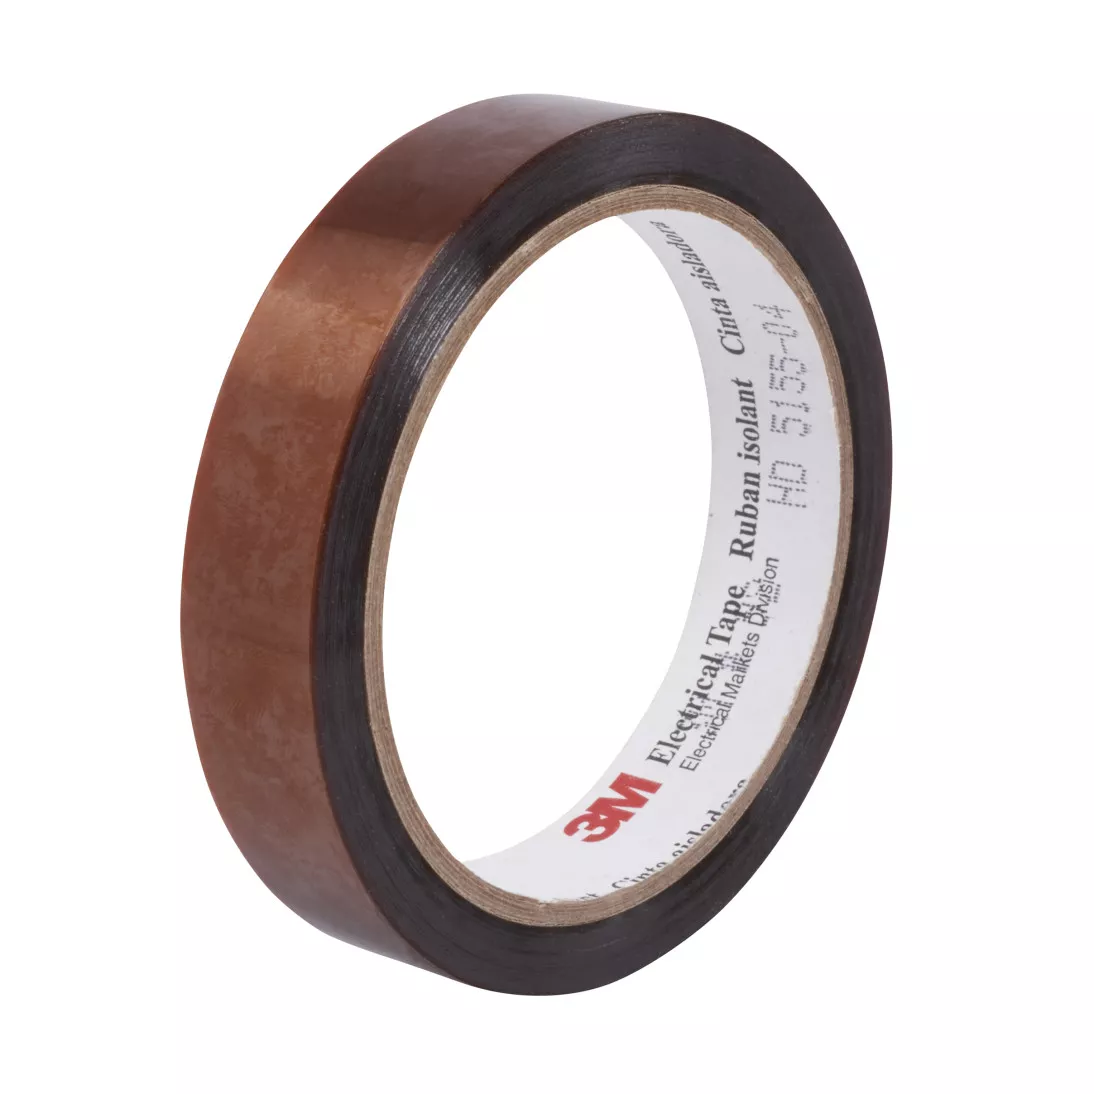 3M™ Polyimide Film Electrical Tape 92, 12 in X36 yds, 3-in paper core,
(single line space core printing), 1 Roll/Case